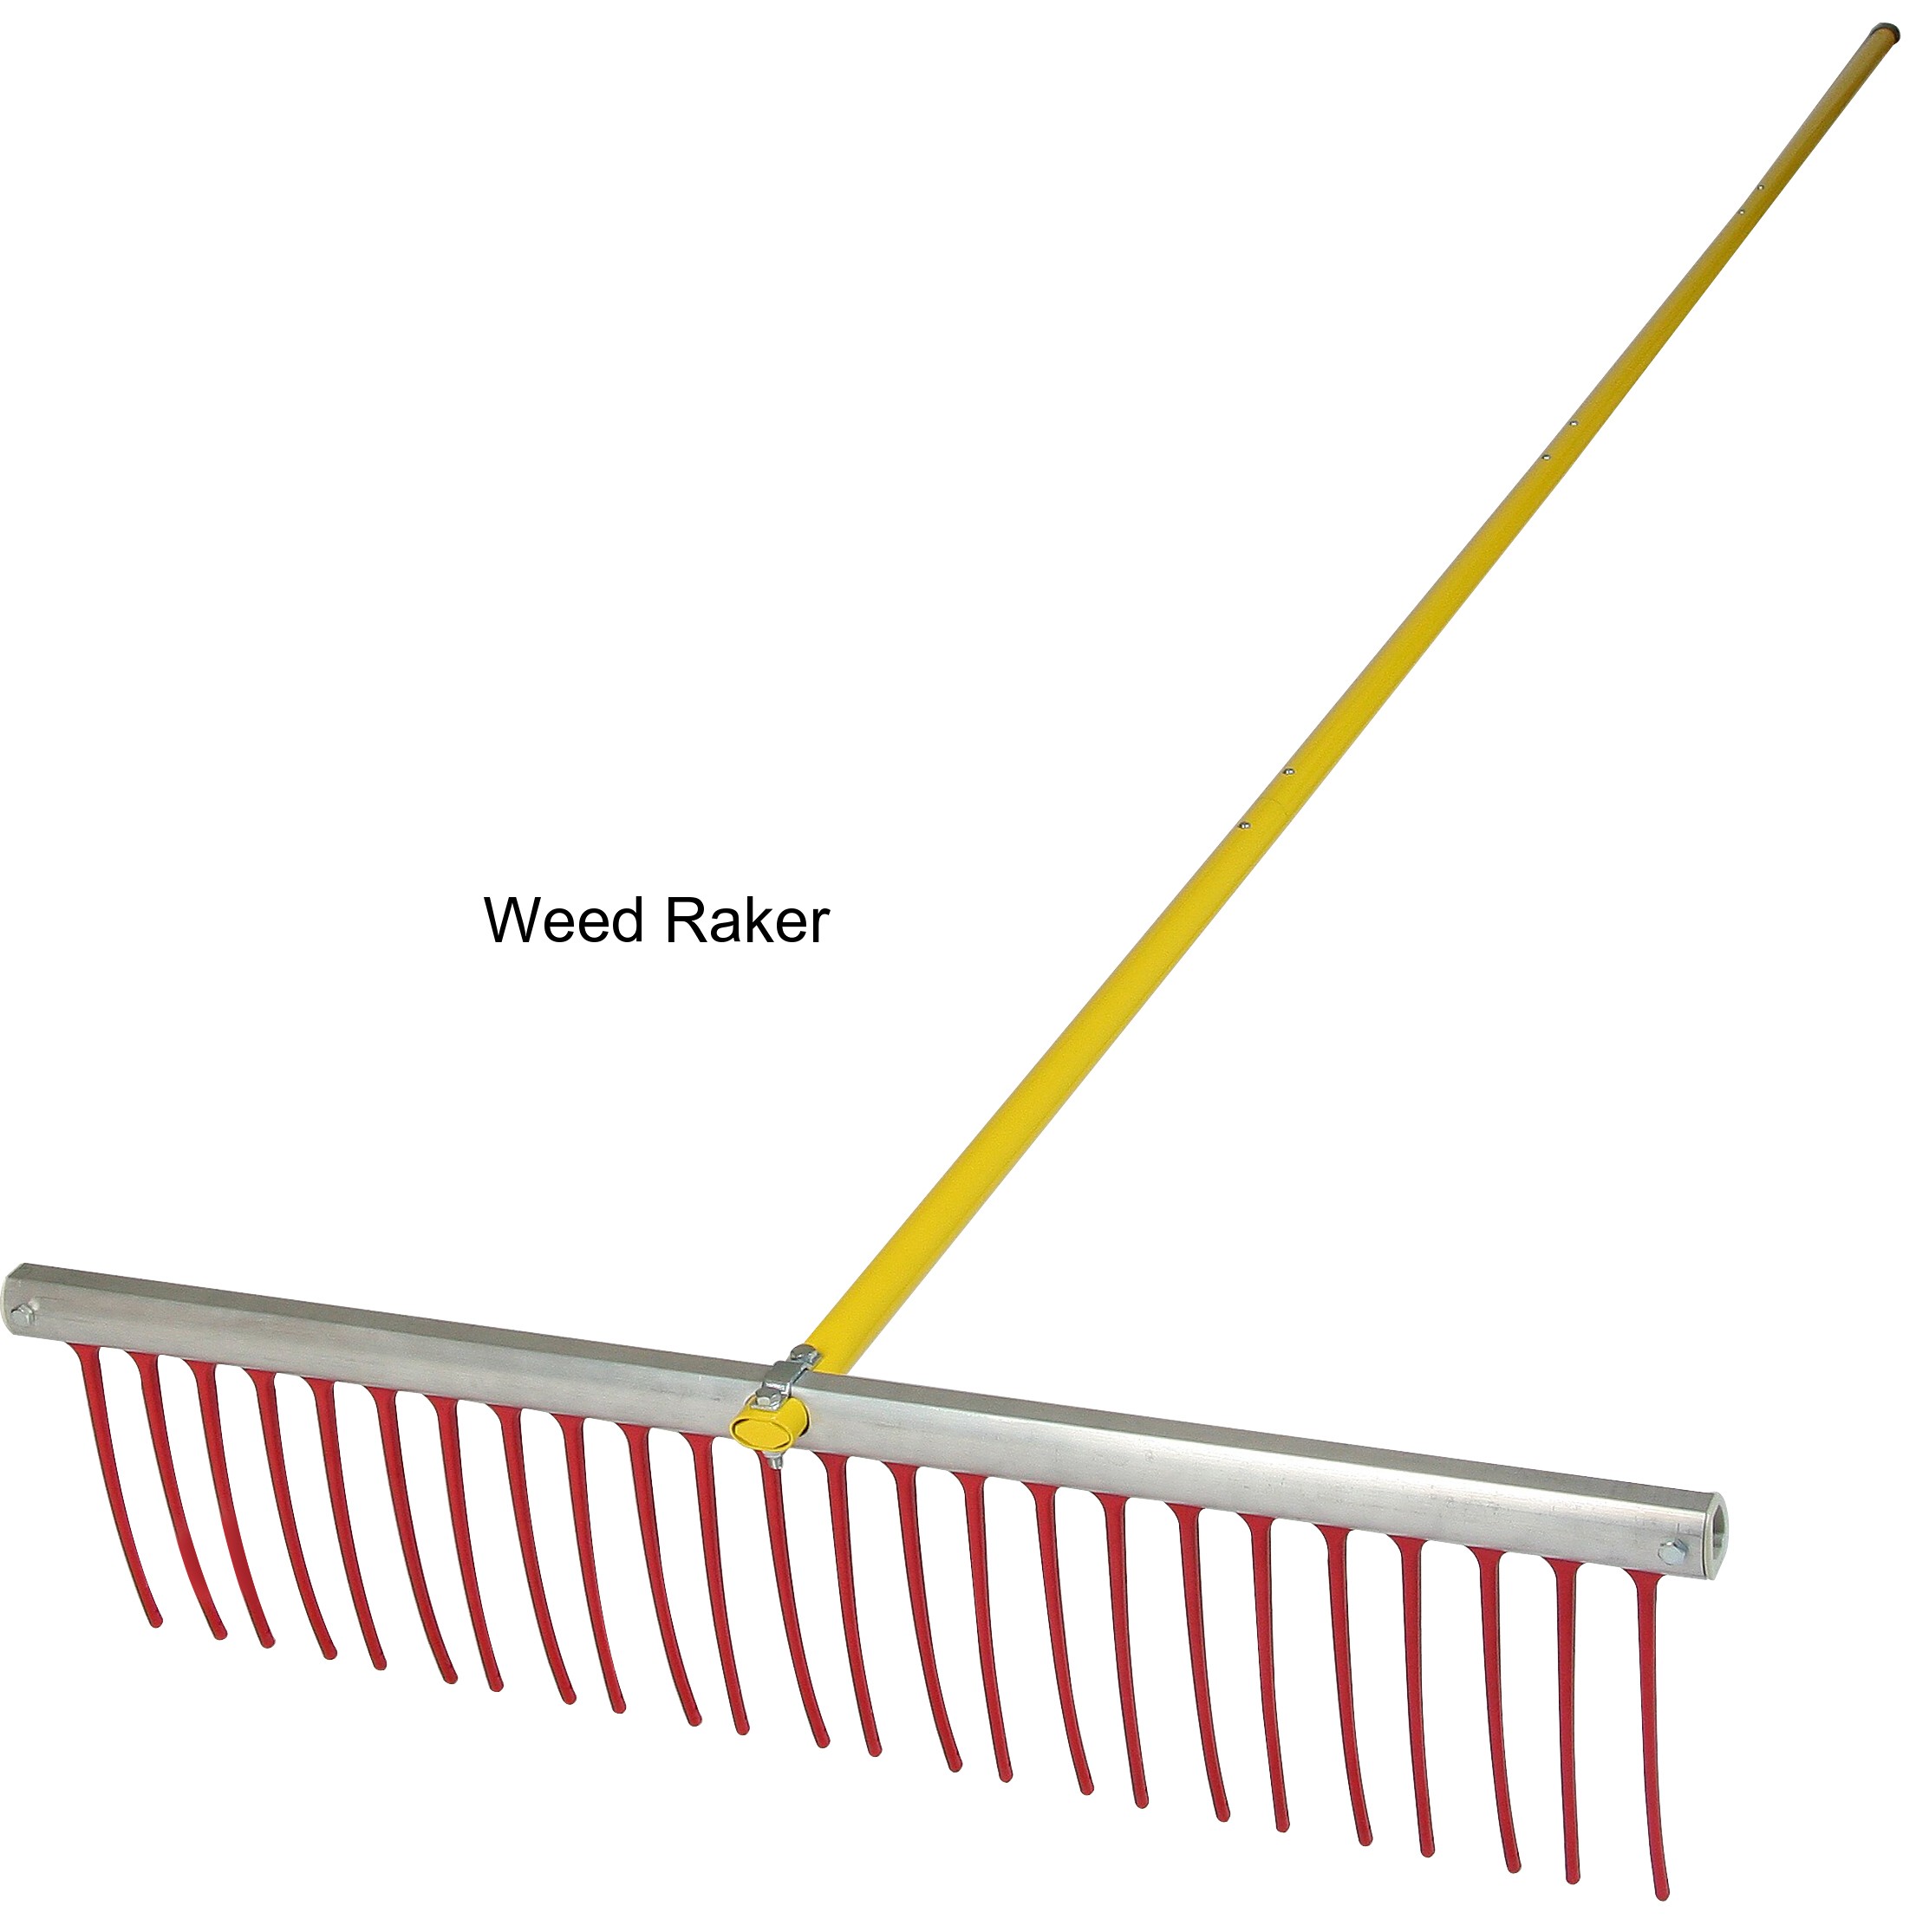 The New Weed Raker™ Controls Invasive Lake and Pond Weeds